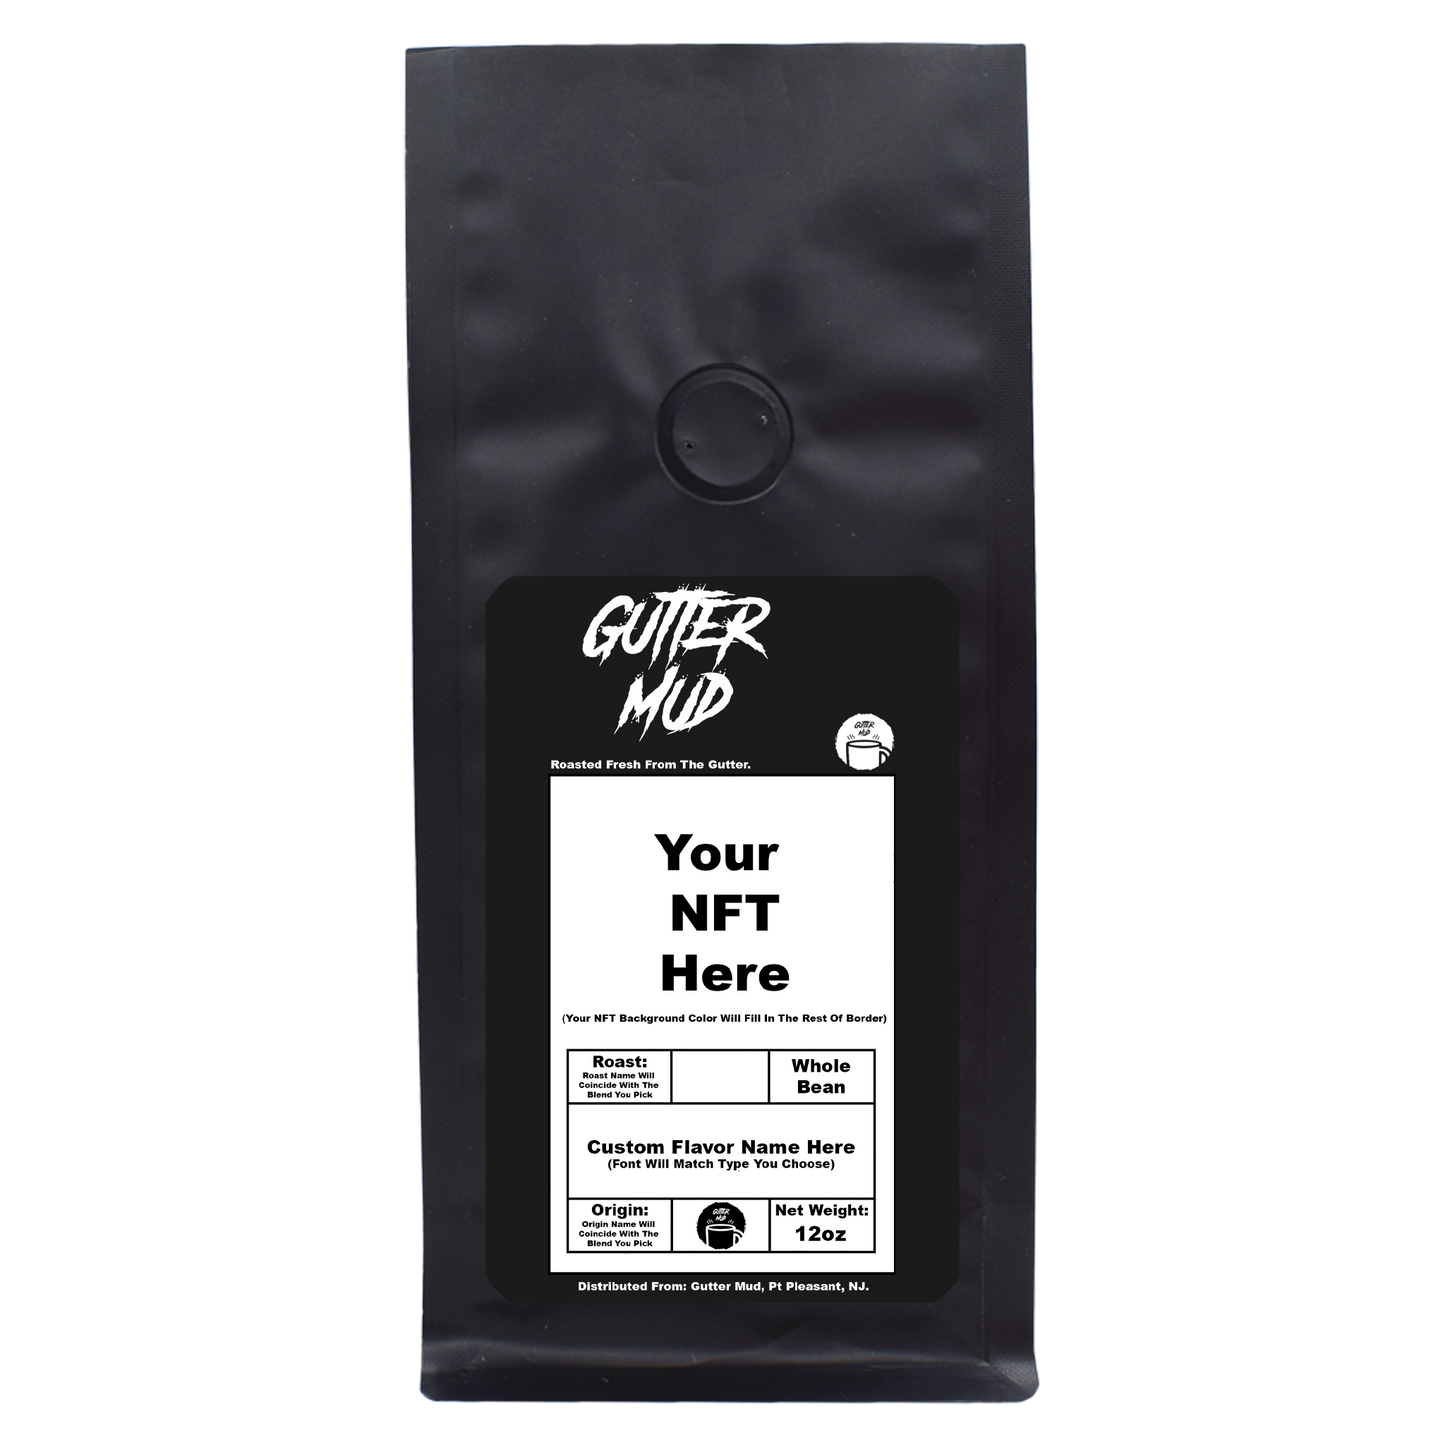 Custom 12oz Collectible Coffee Bag Featuring Your NFT!